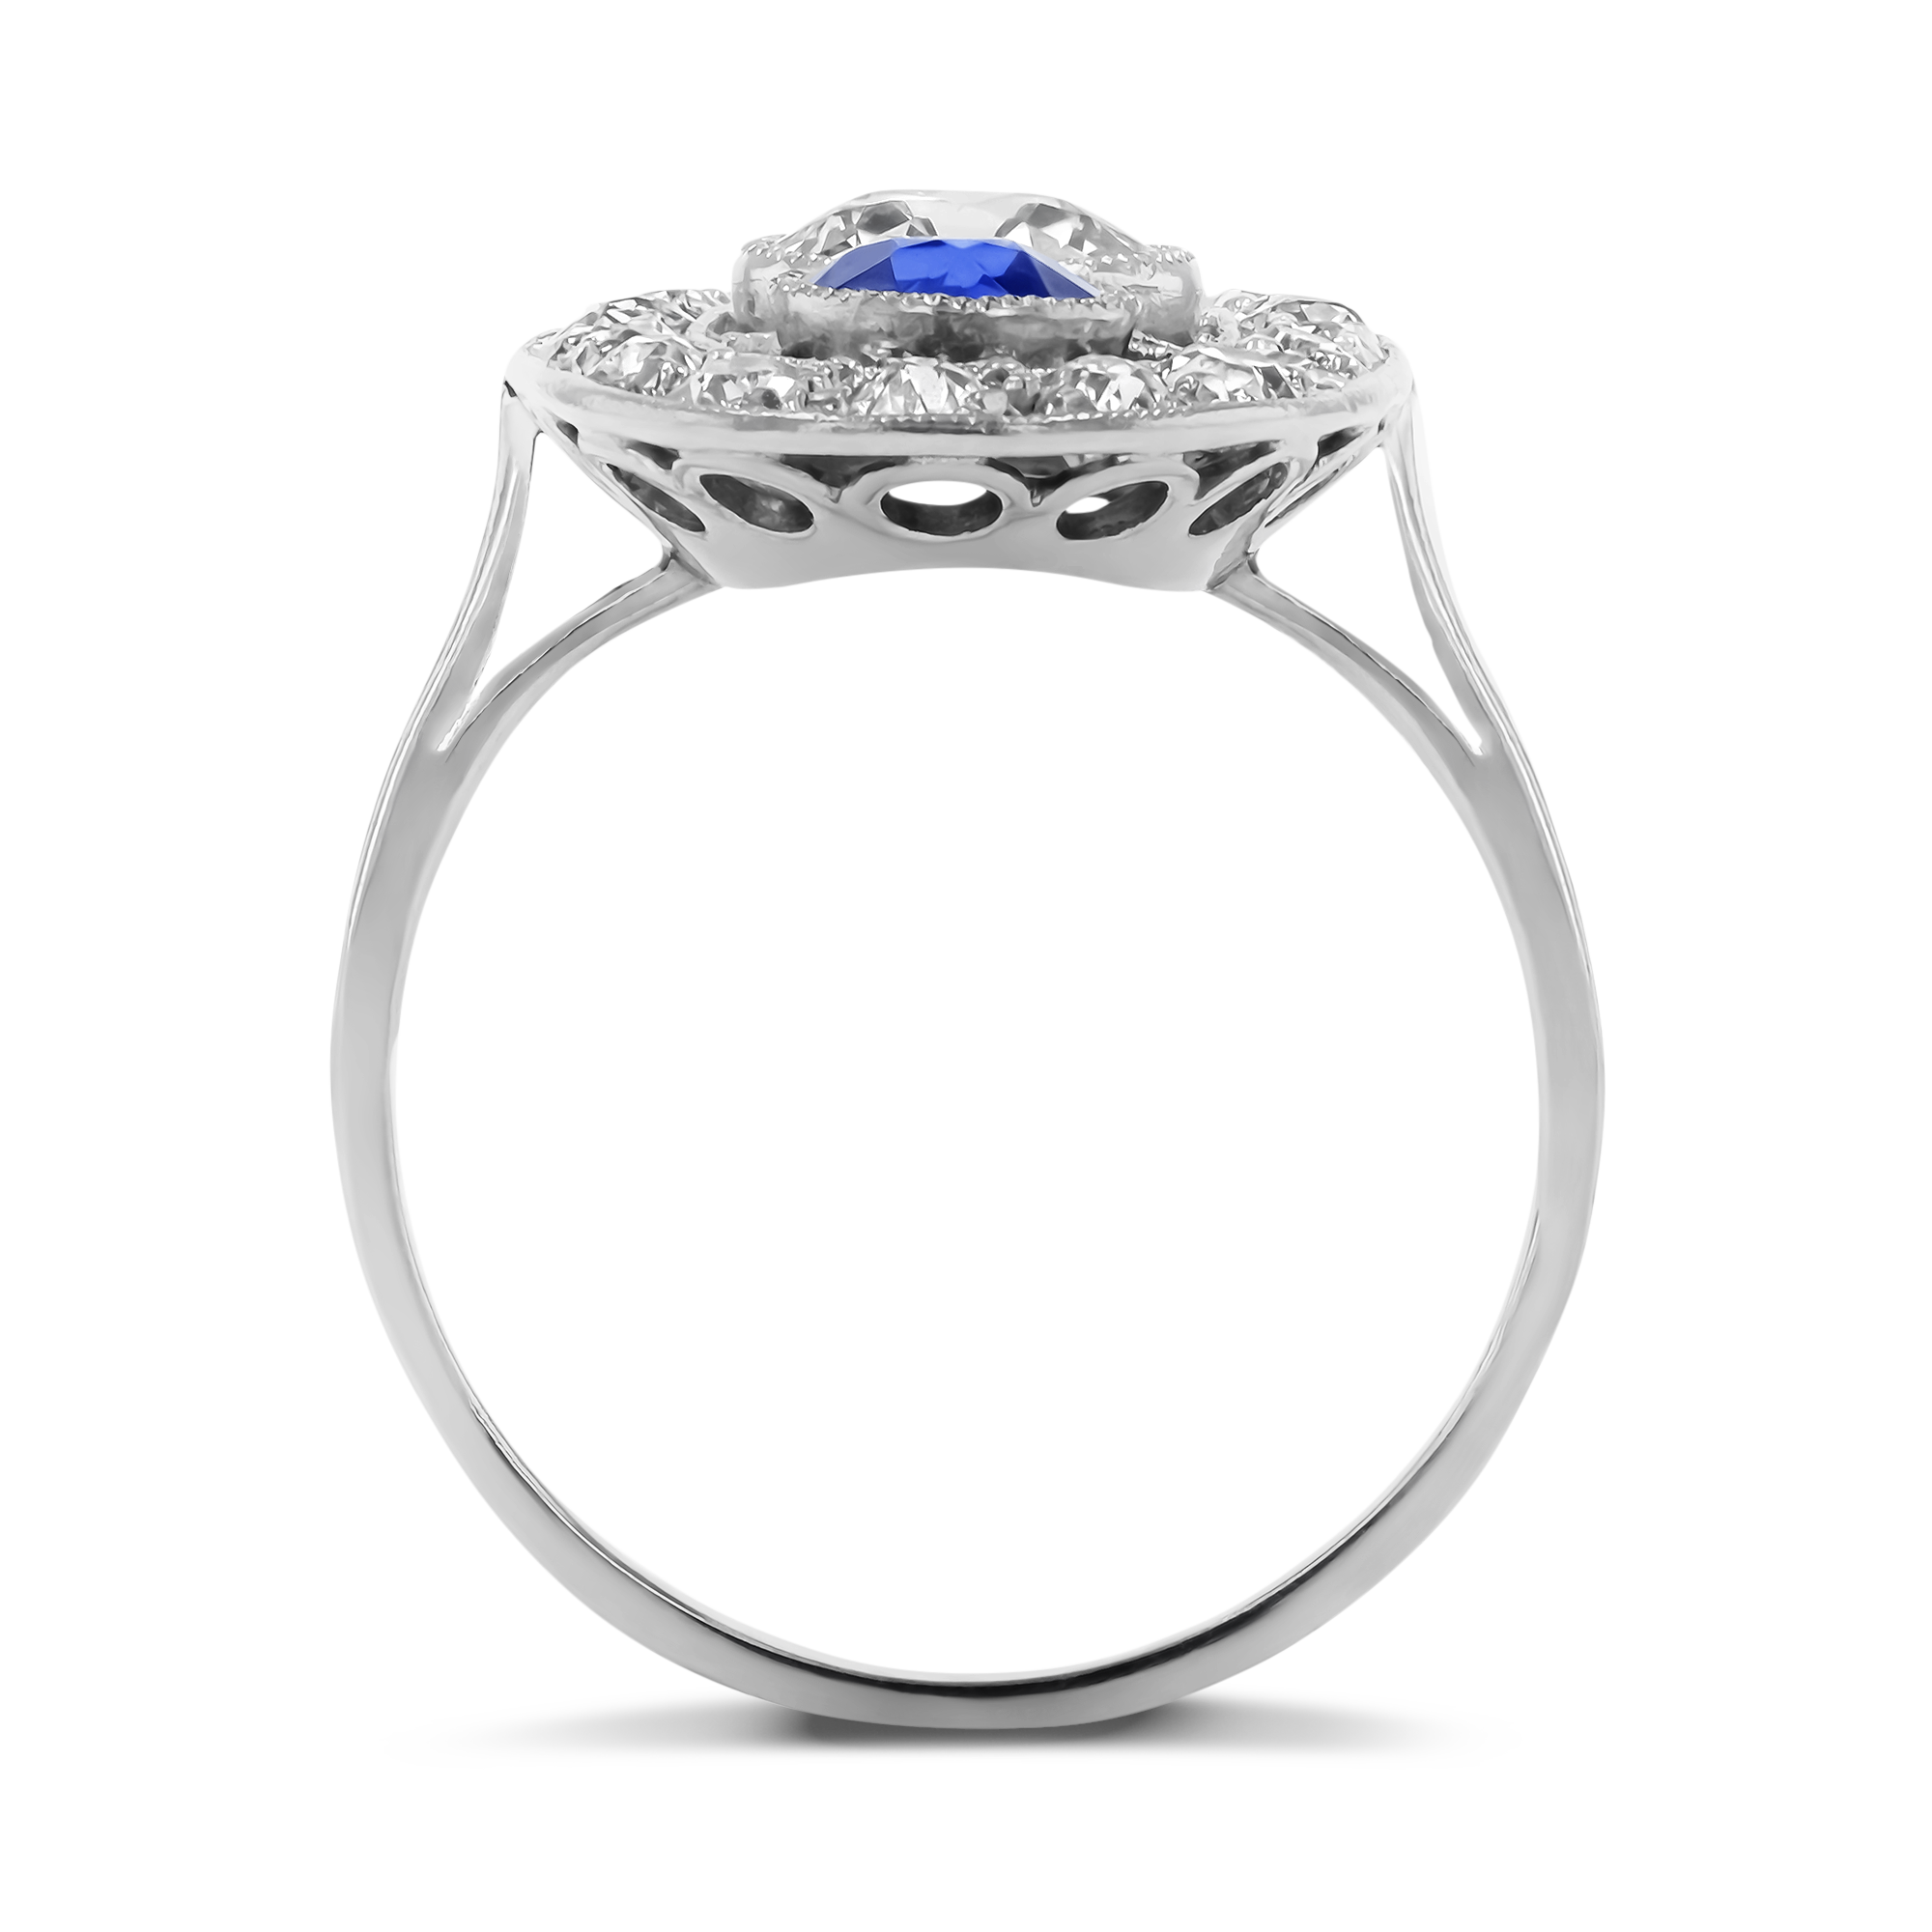 Edwardian Inspired Sapphire and Diamond Cluster Ring with Diamond Surround Brilliant Cut, Millegrain Set_3